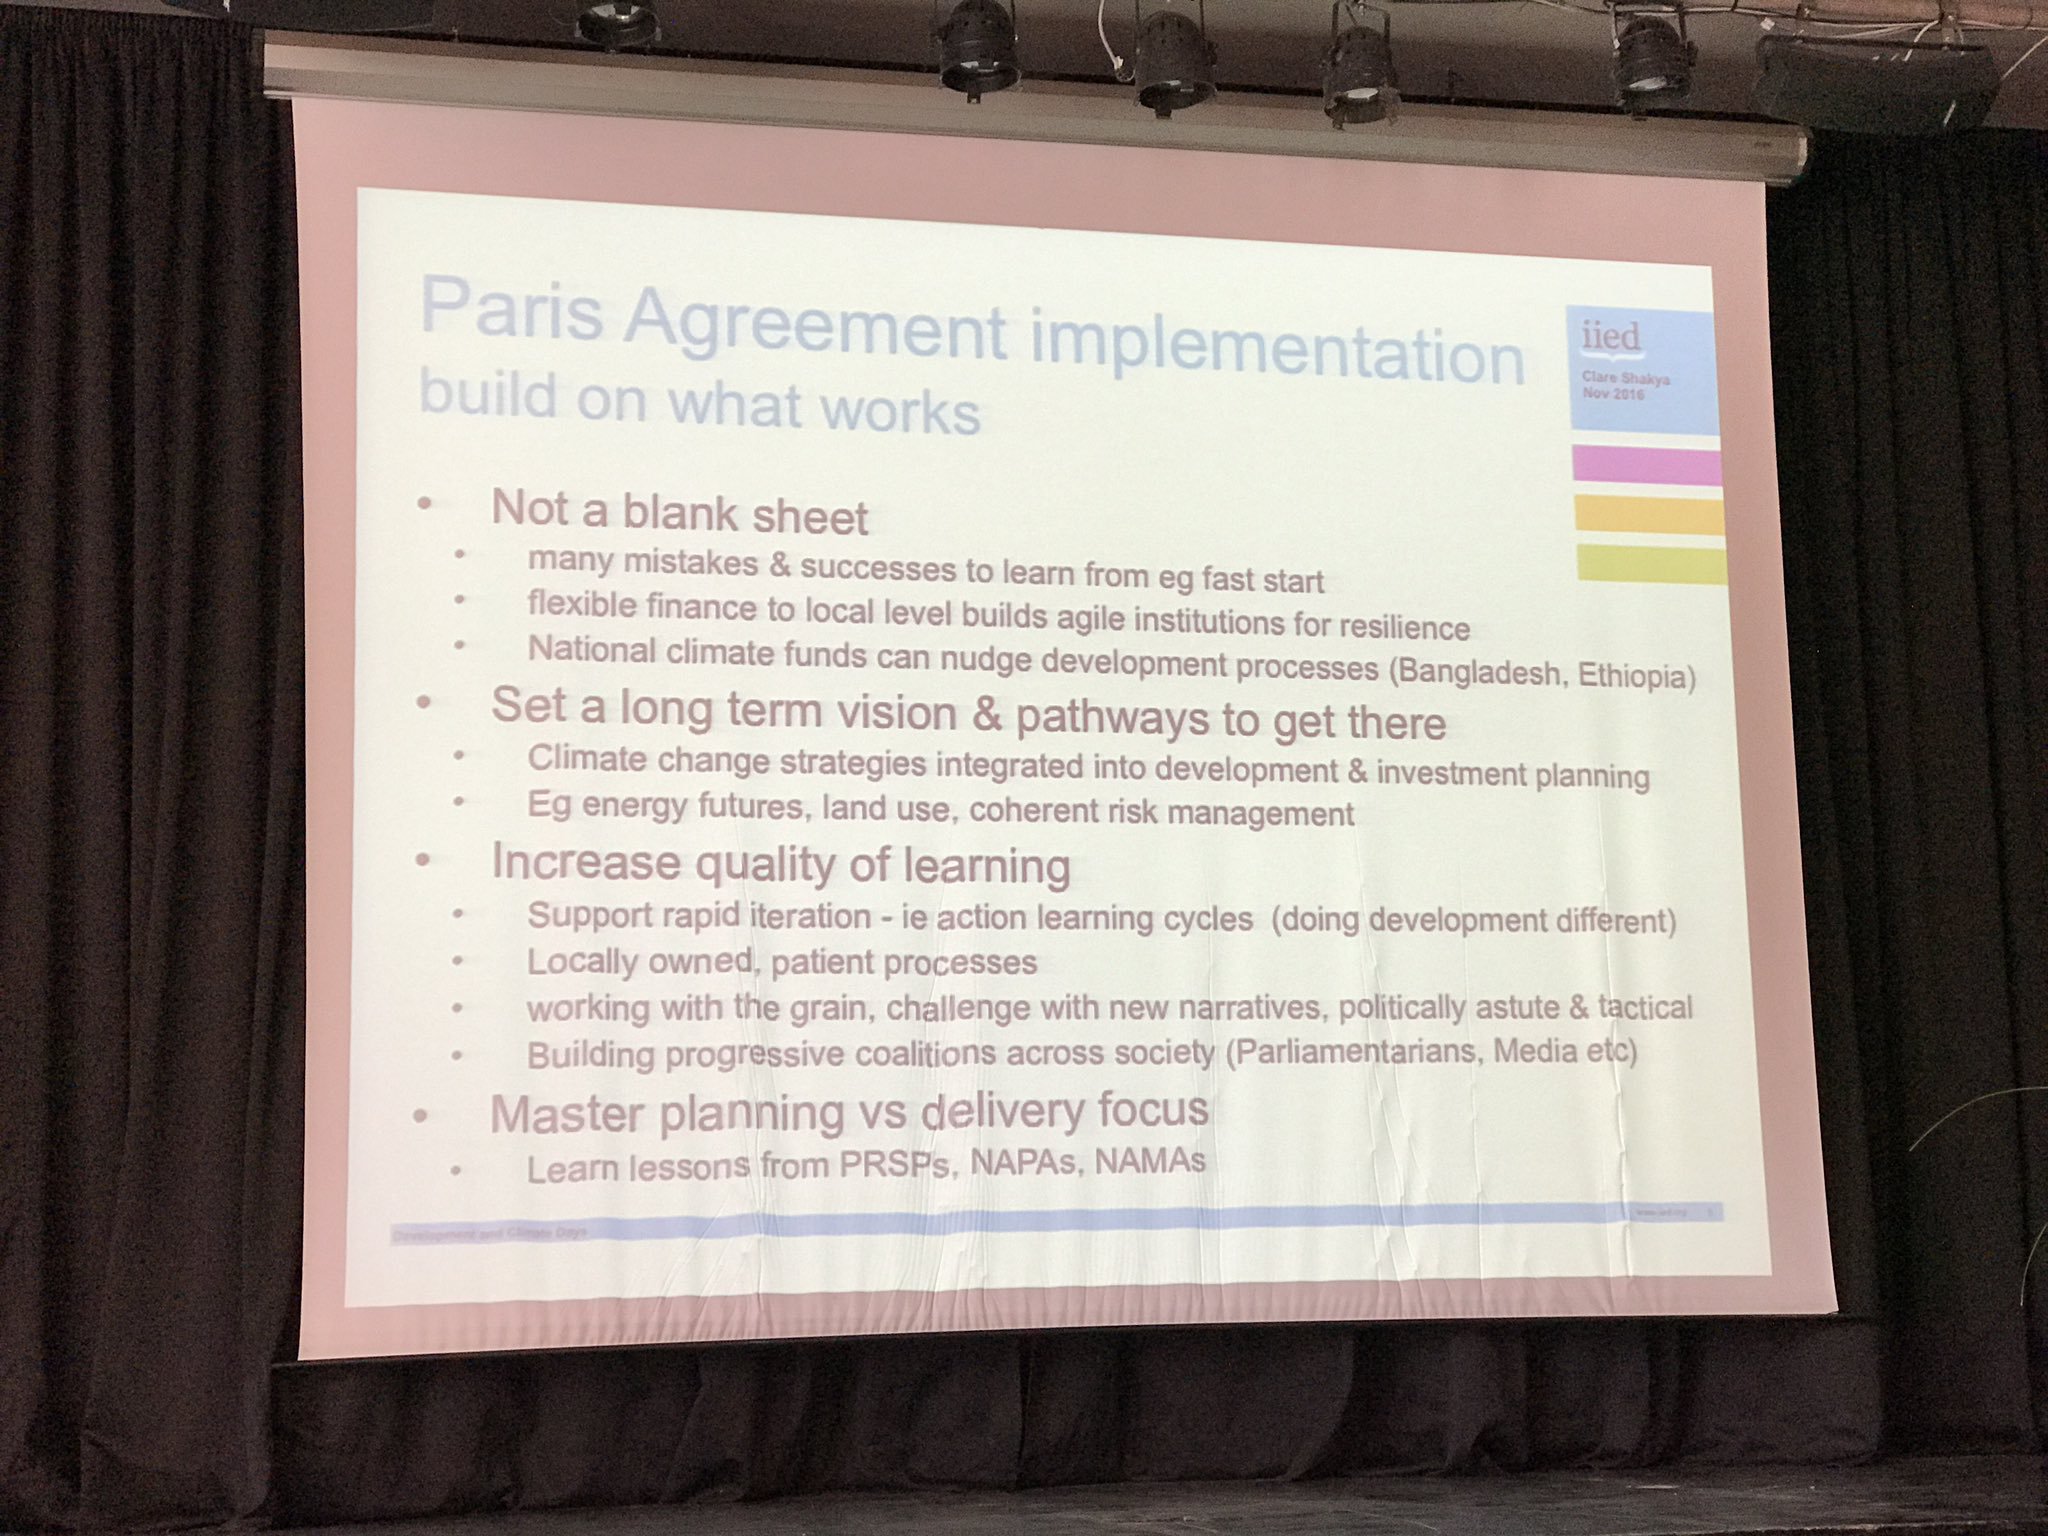 Clare Shakya @IIED: build on what works to implement Paris agreement #dcdays https://t.co/RfhItMGP7S